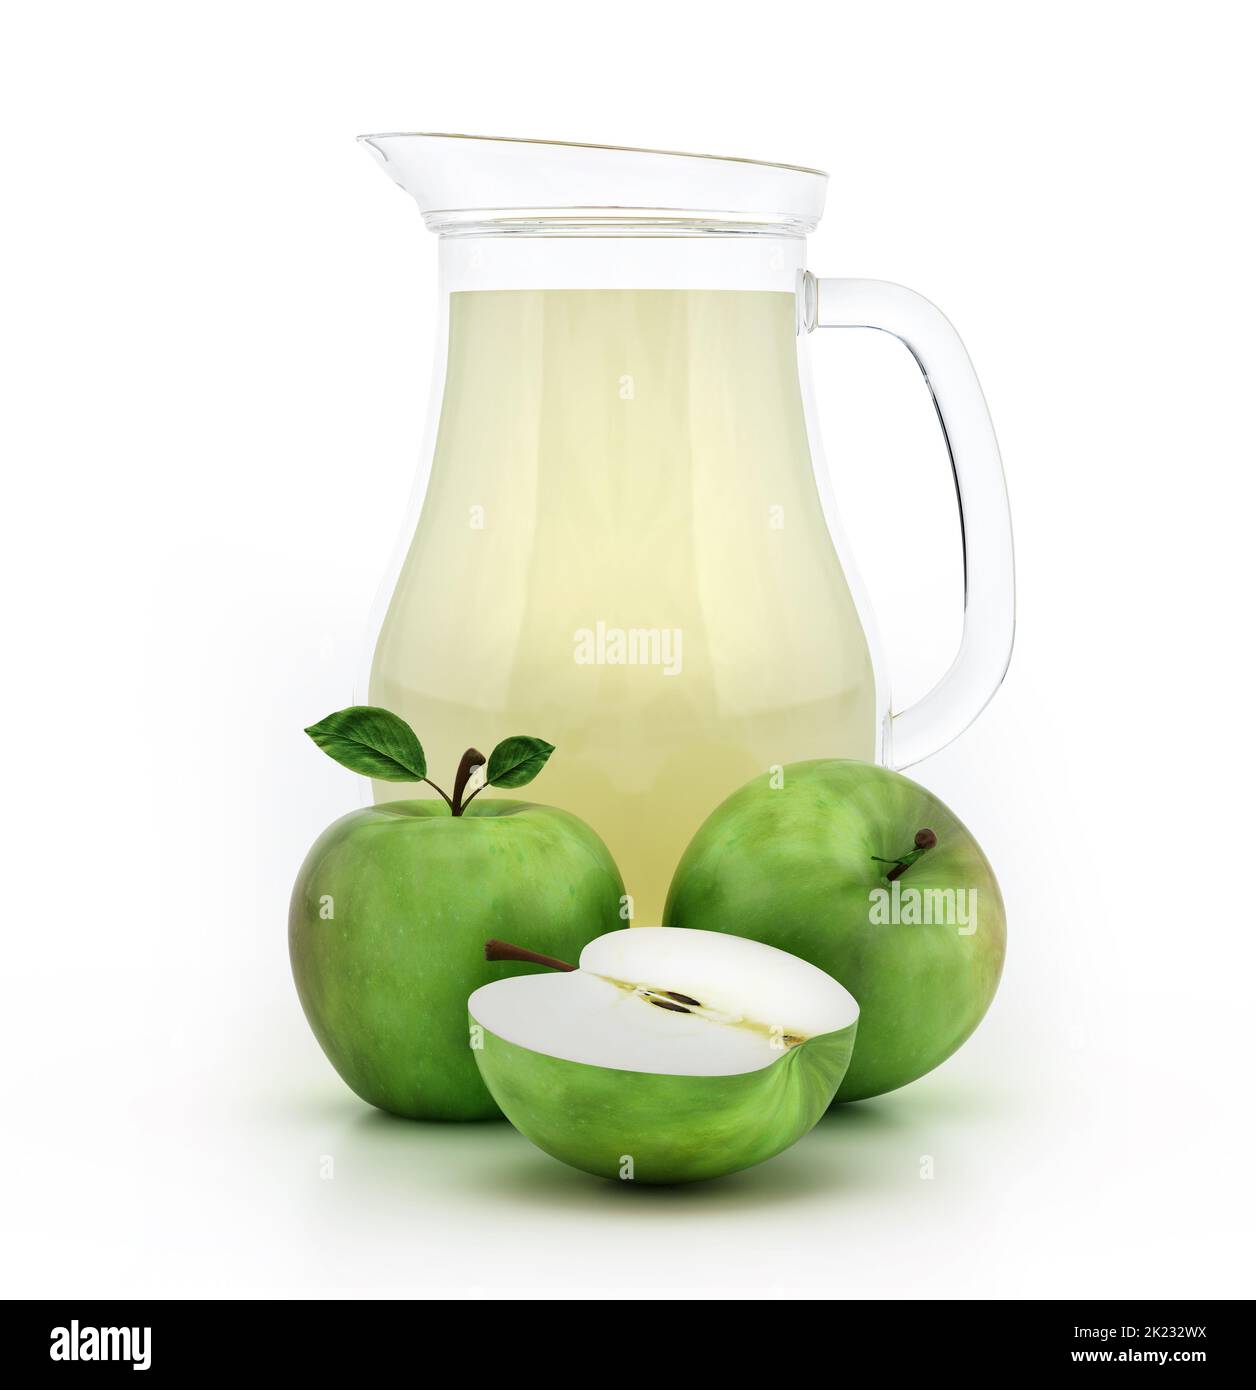 Fresh green apples and apple juice inside glass jug isolated on white background. 3D illustration. Stock Photo